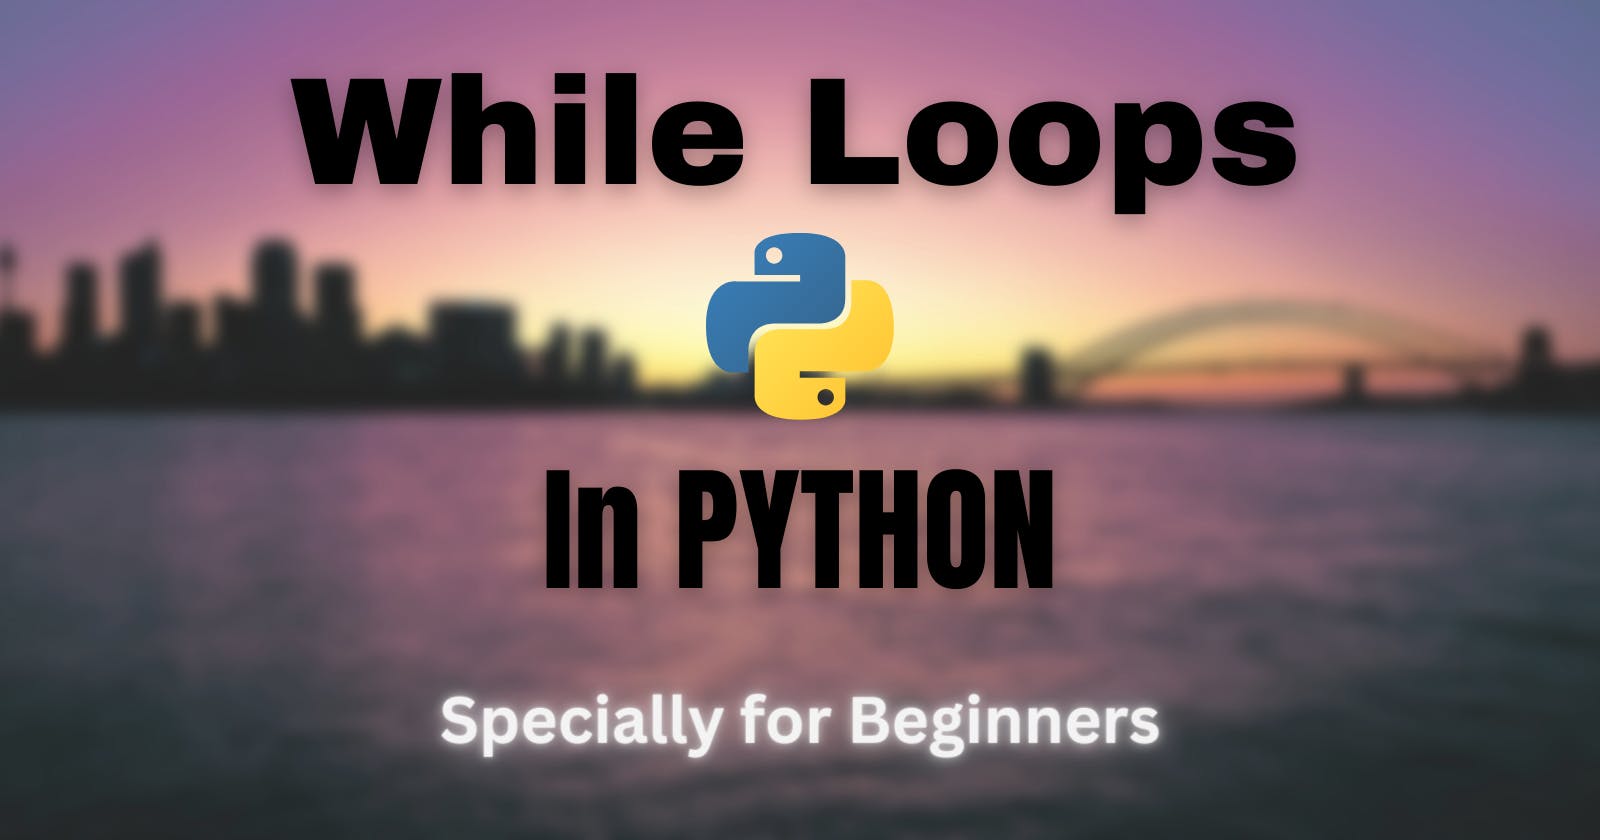 While Loops in Python!